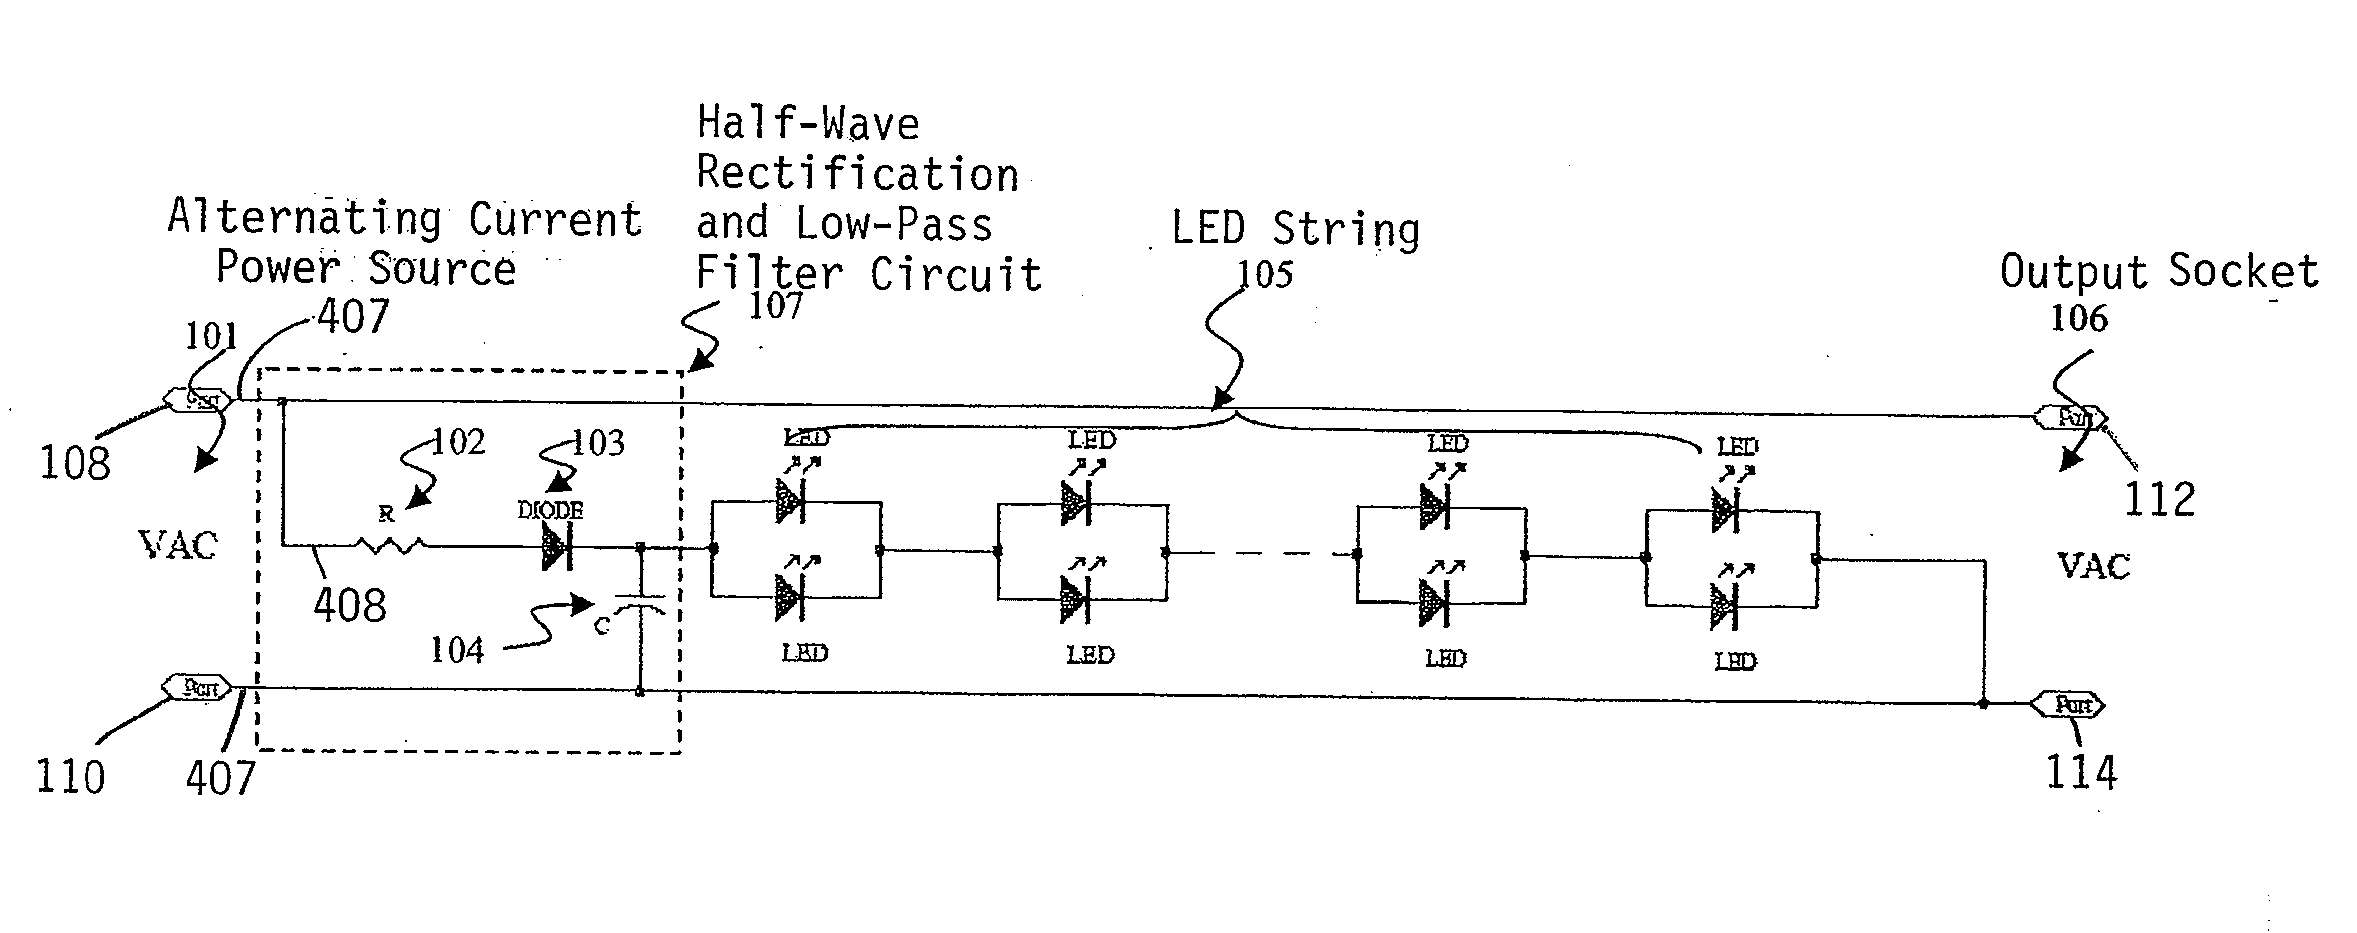 Half-wave rectification circuit with a low-pass filter for LED light strings